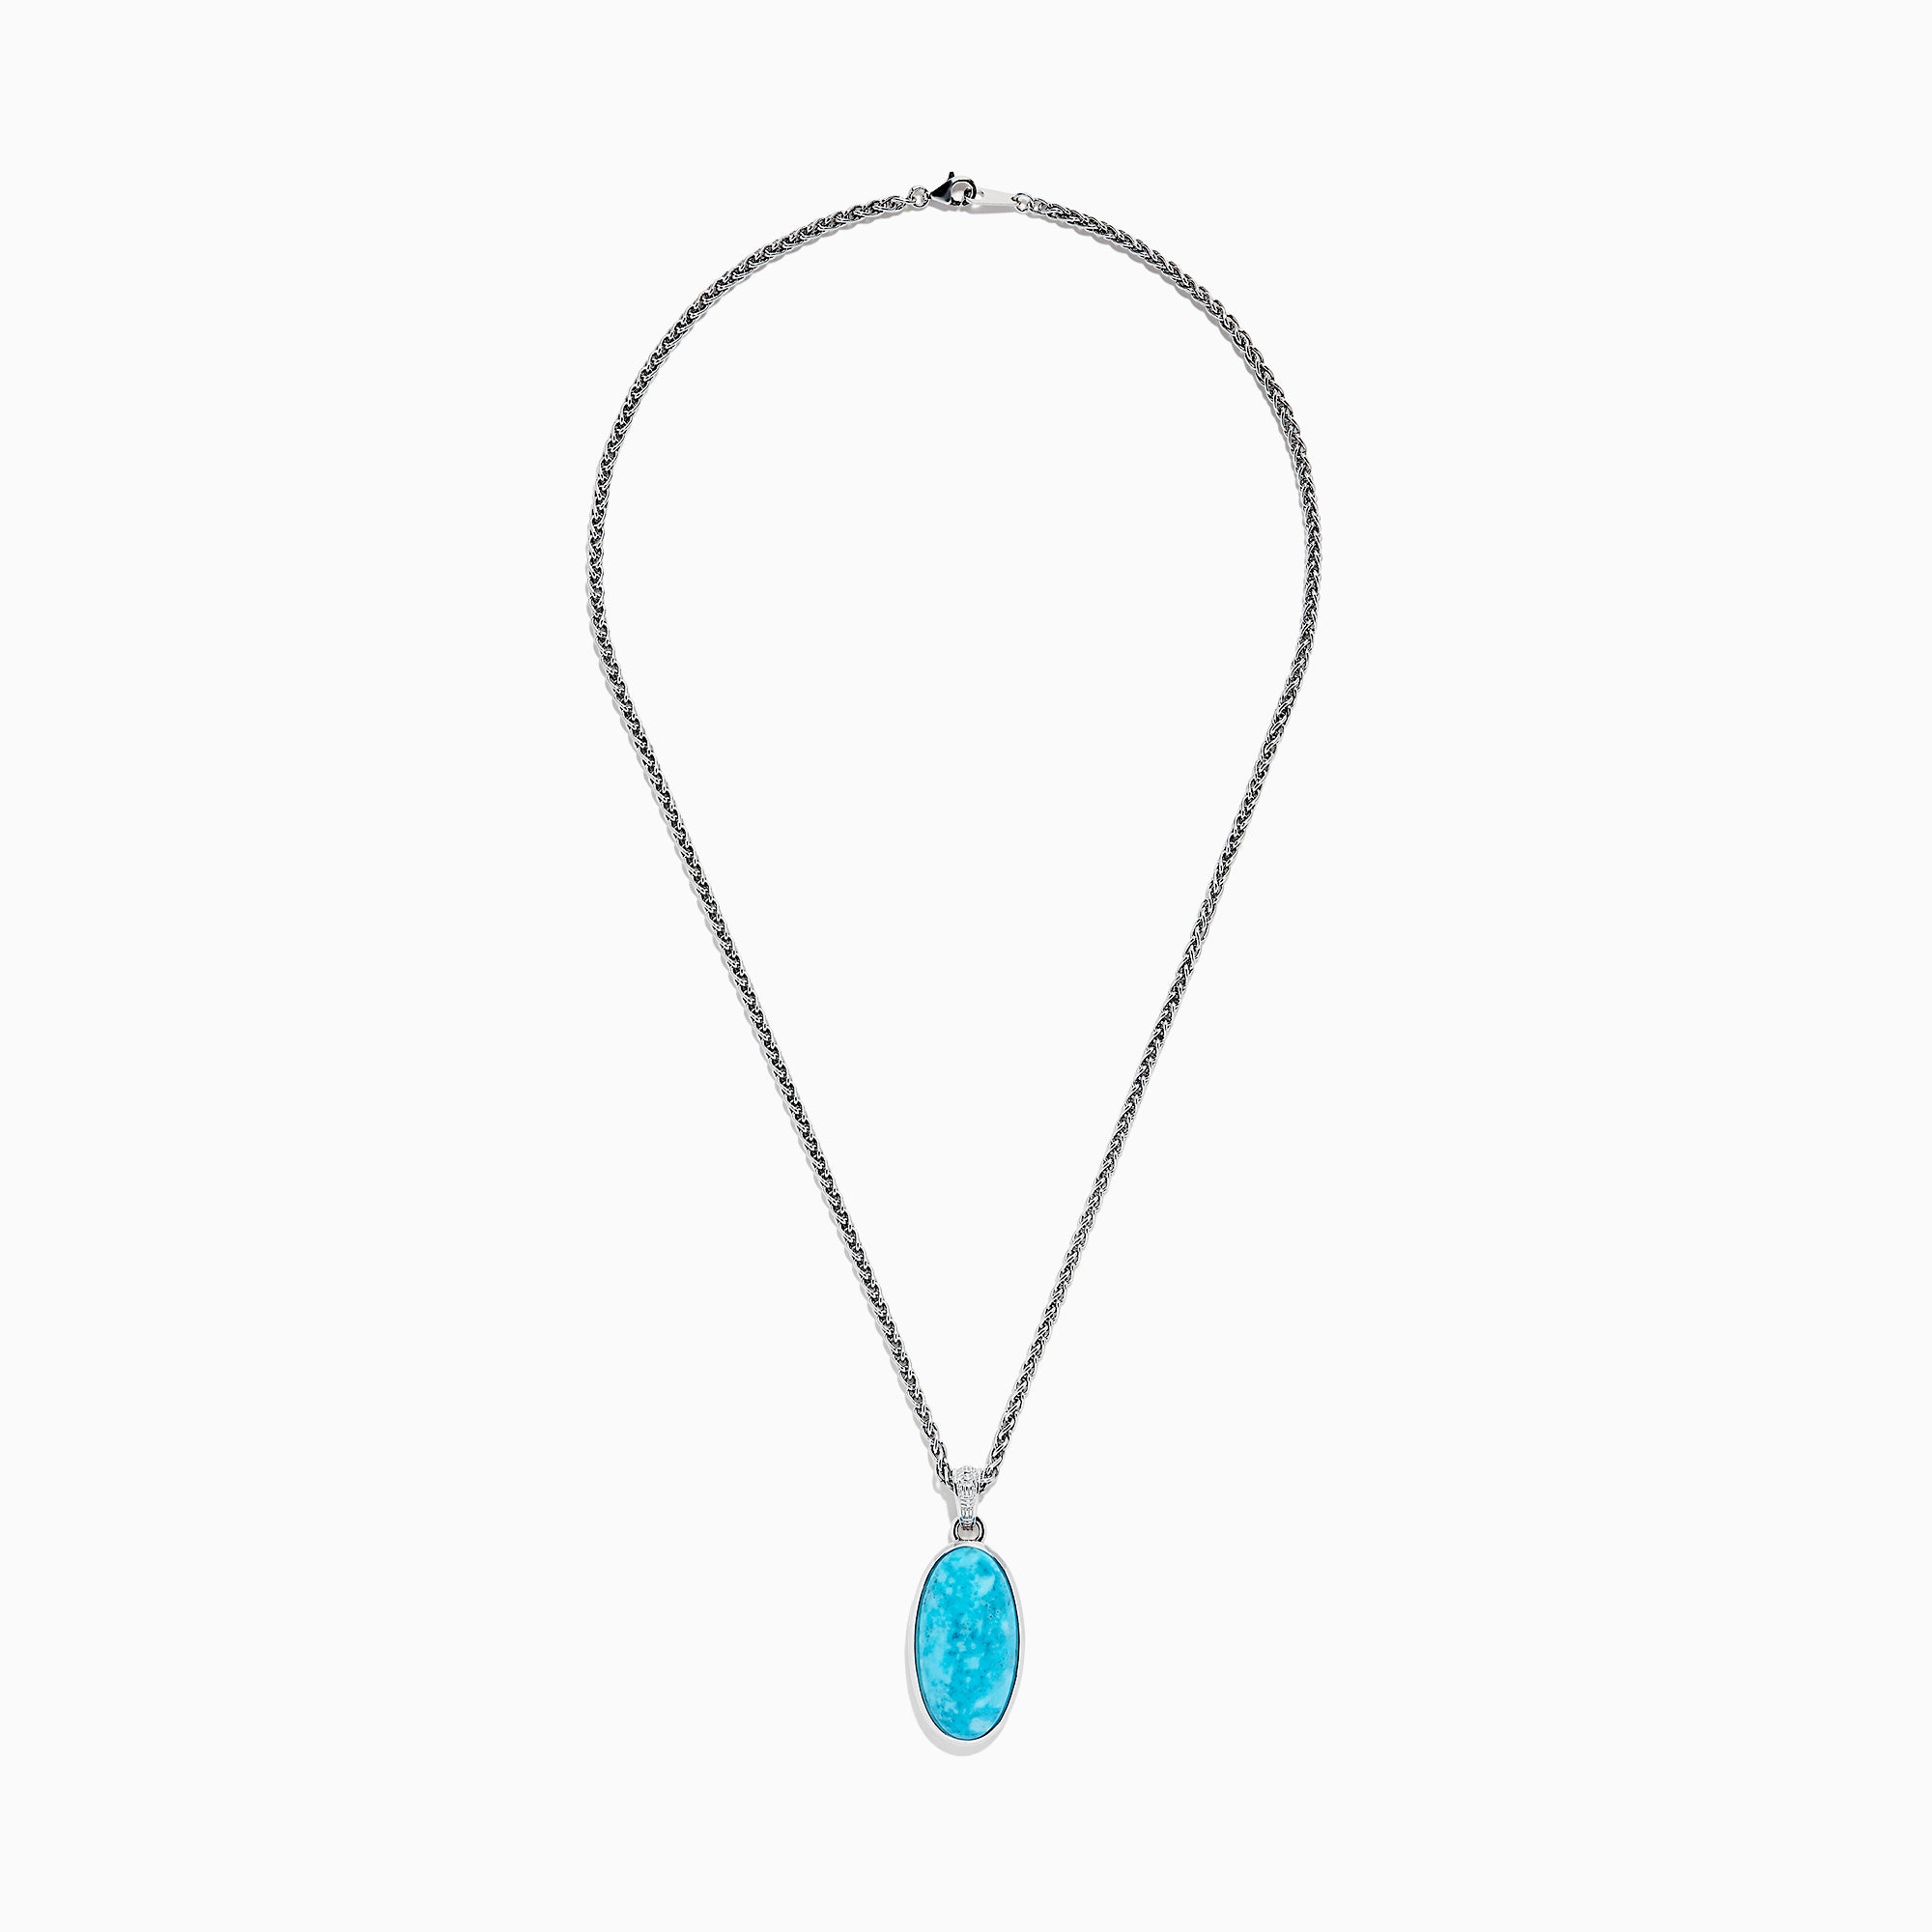 Effy 925 Sterling Silver Turquoise Pendant, 18.50 TCW